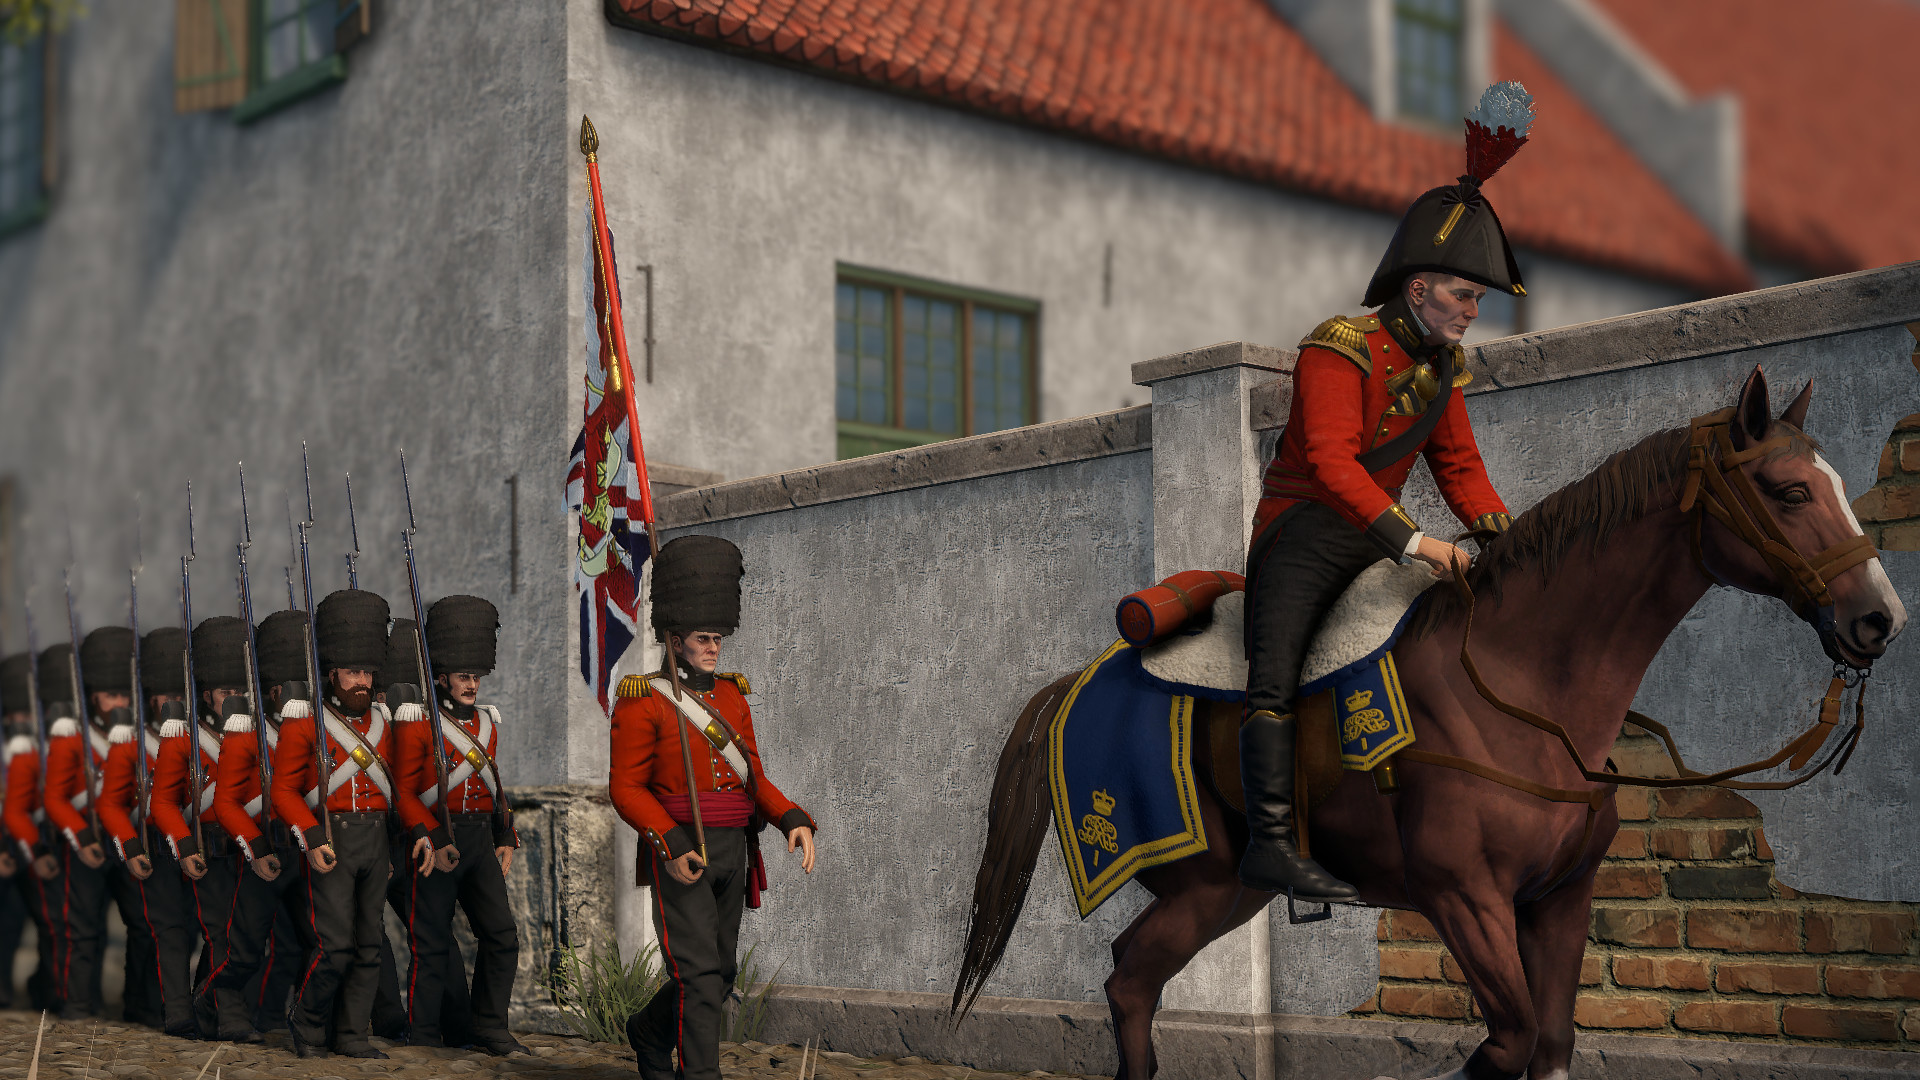 [$ 38.41] Holdfast: Nations At War - Napoleonic Pack Steam CD Key